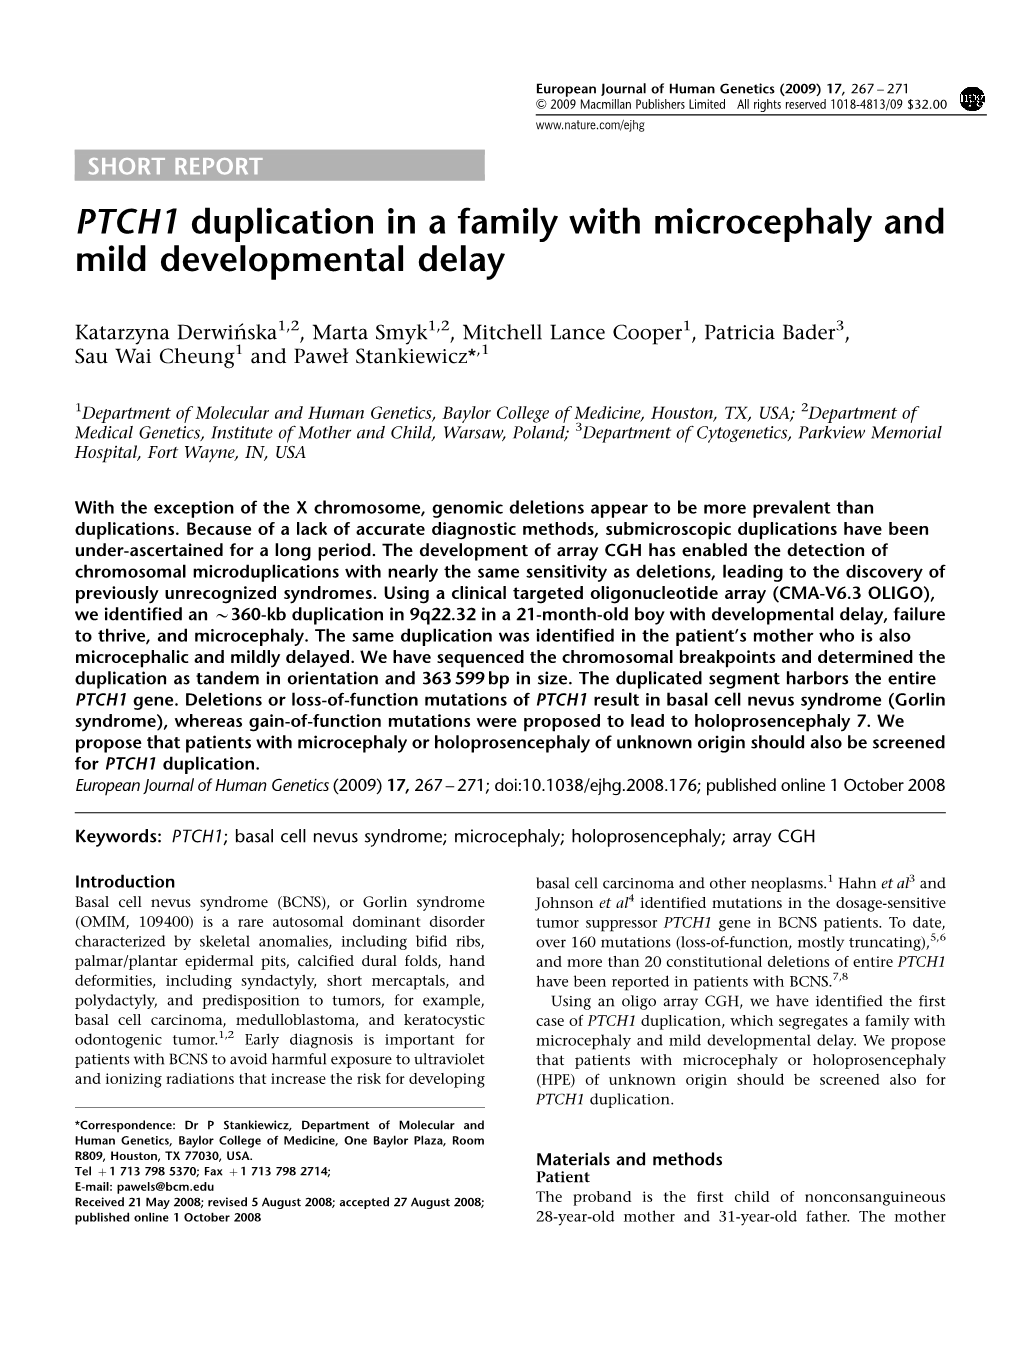 PTCH1 Duplication in a Family with Microcephaly and Mild Developmental Delay